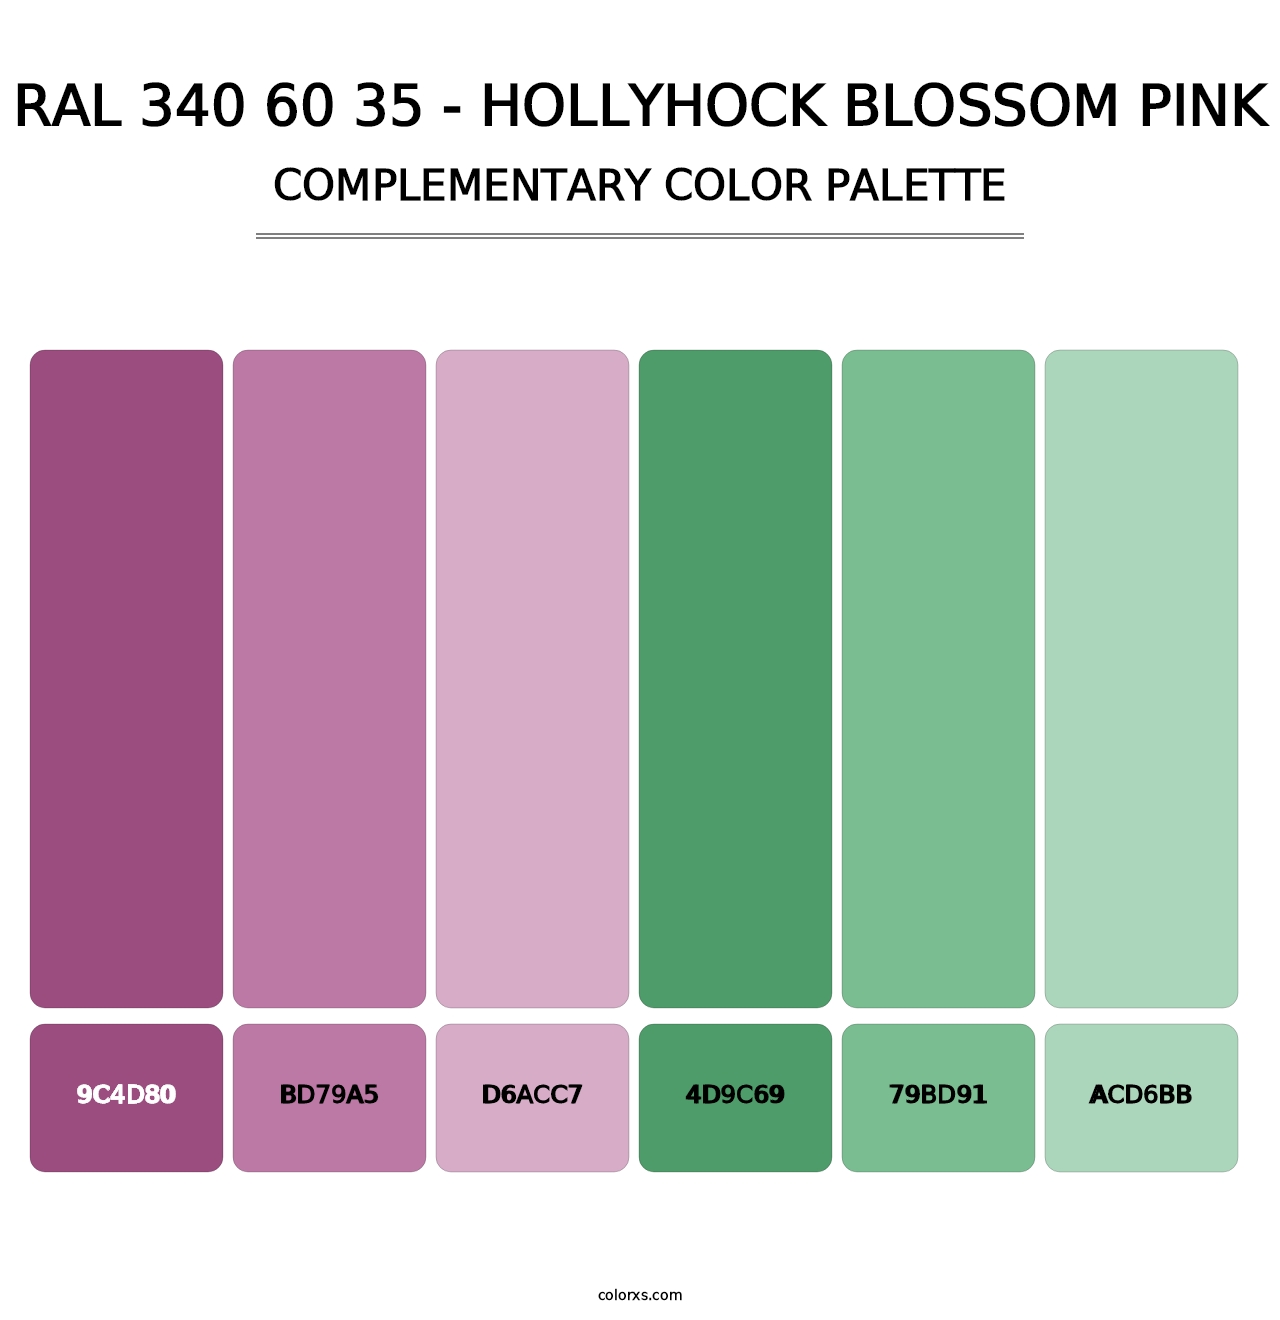 RAL 340 60 35 - Hollyhock Blossom Pink - Complementary Color Palette